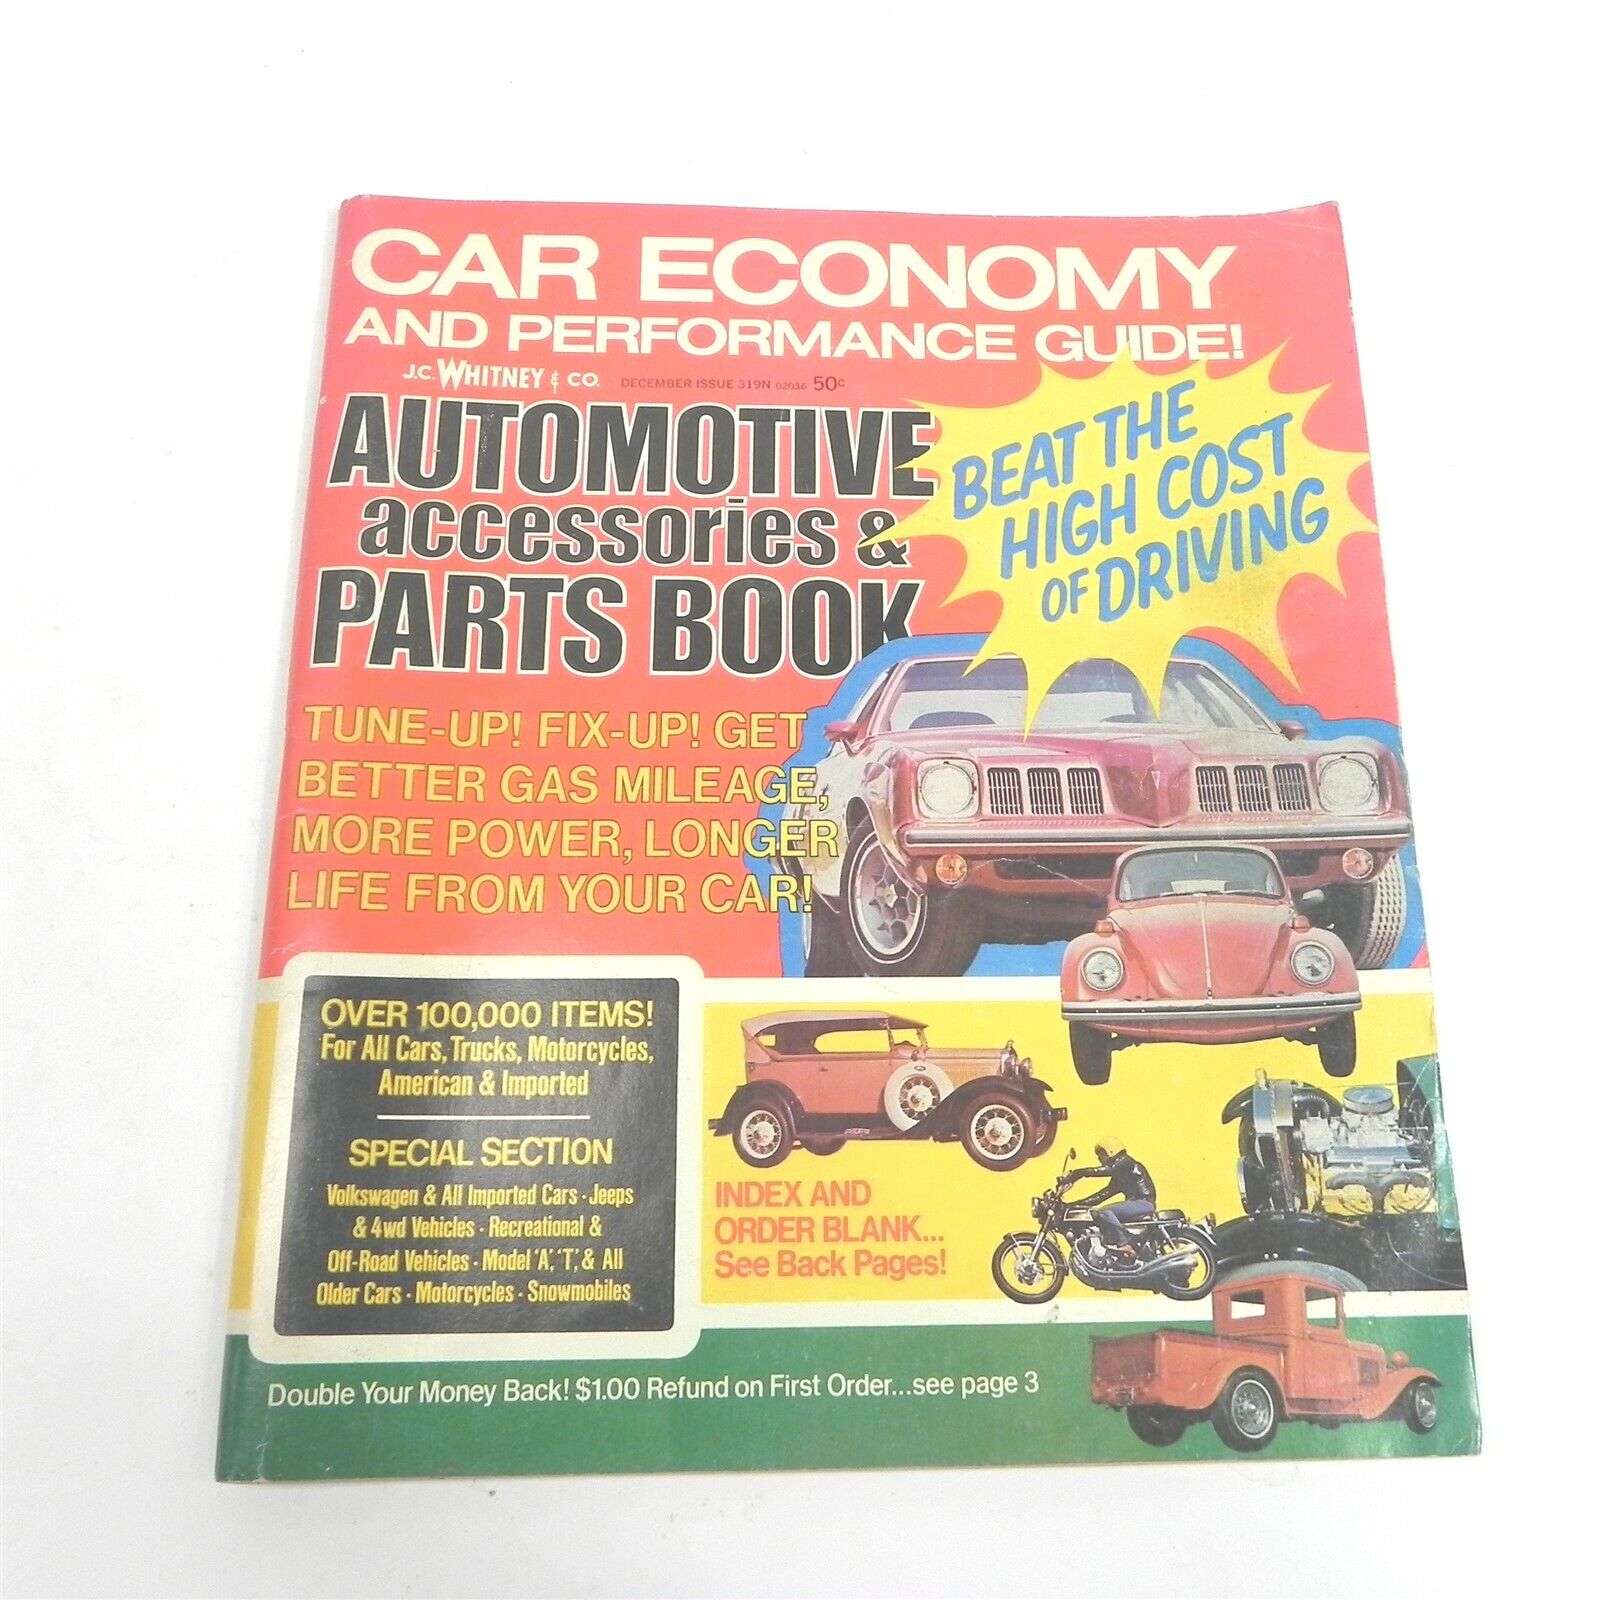 VINTAGE 1973 JC WHITNEY CAR ECONOMY AND PERFORMANCE GUIDE AUTOMOTIVE PARTS BOOK